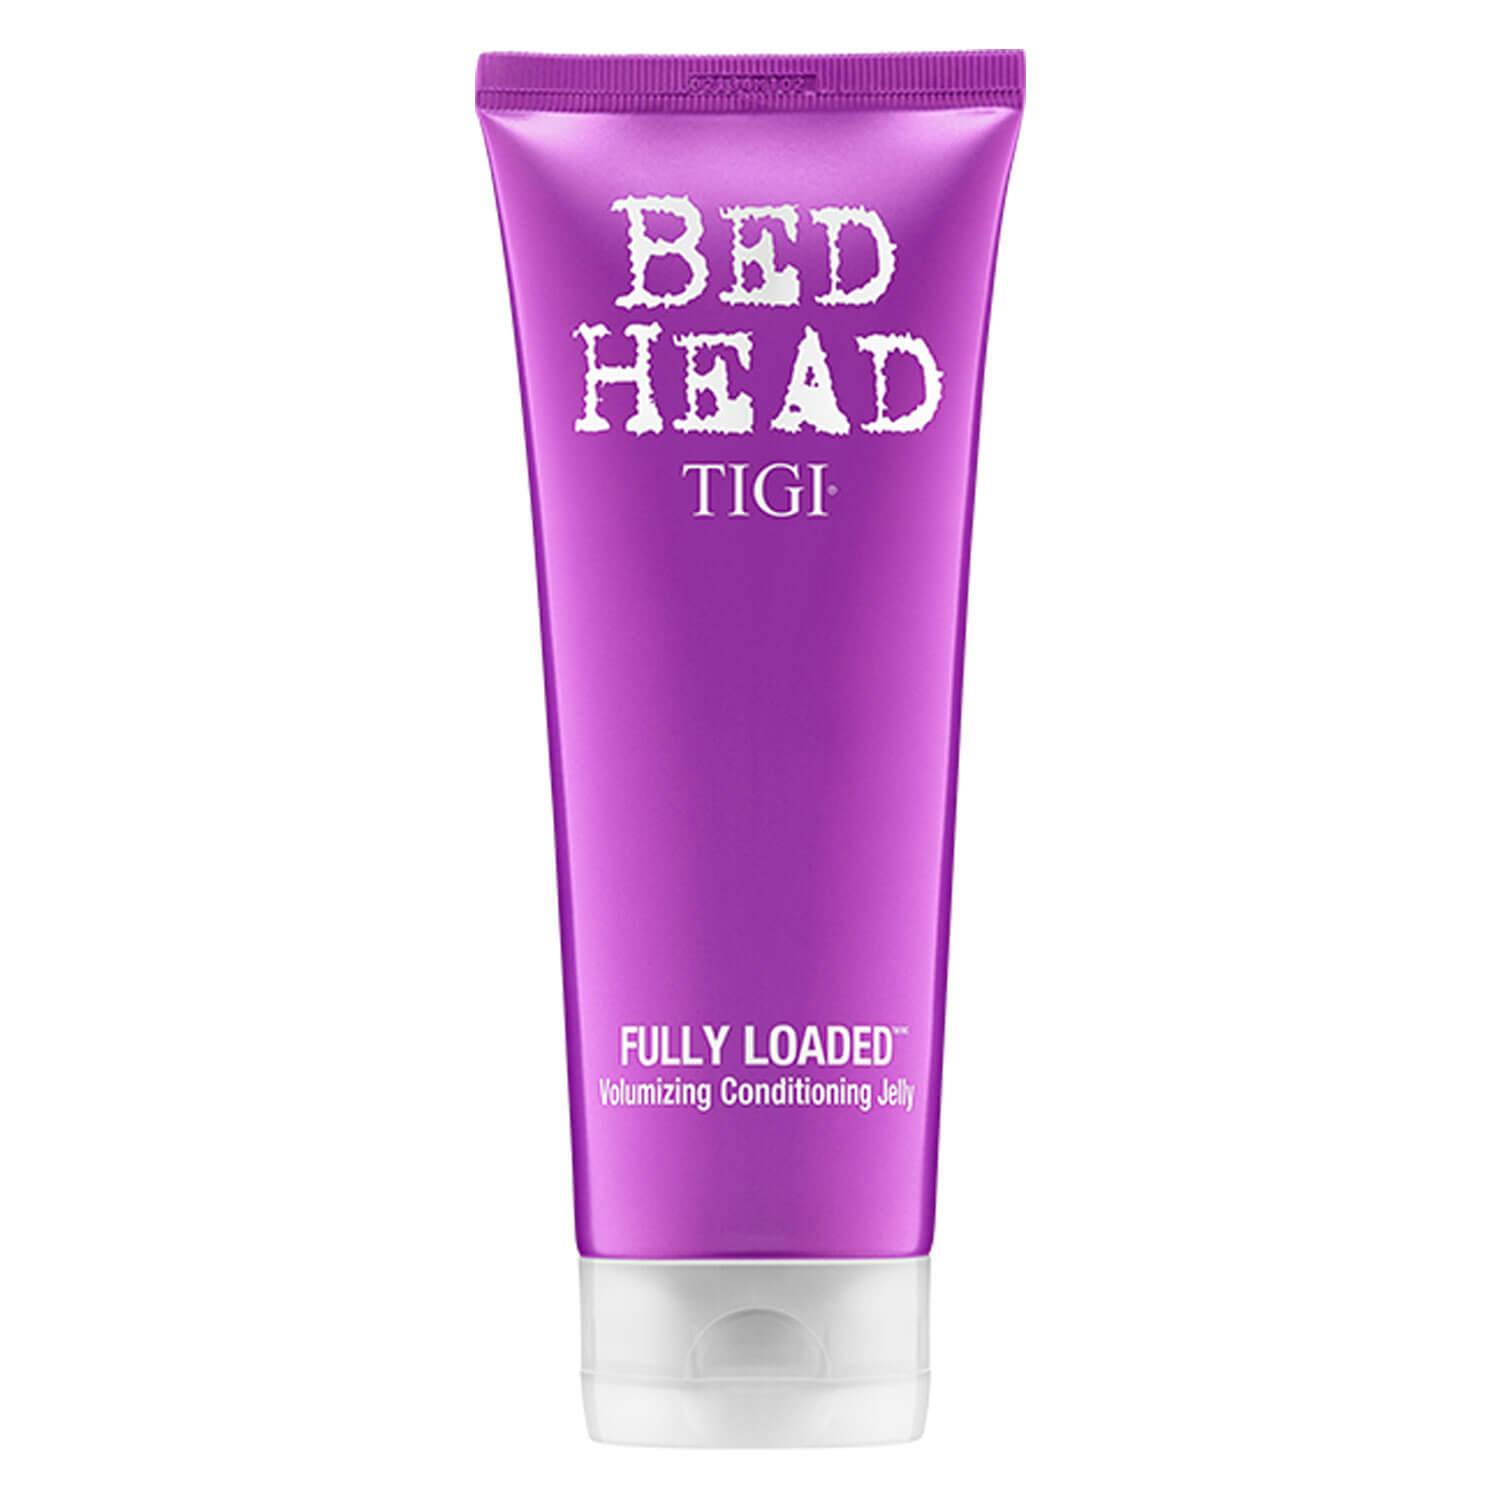 Bed Head Fully Loaded - Volumizing Conditioning Jelly